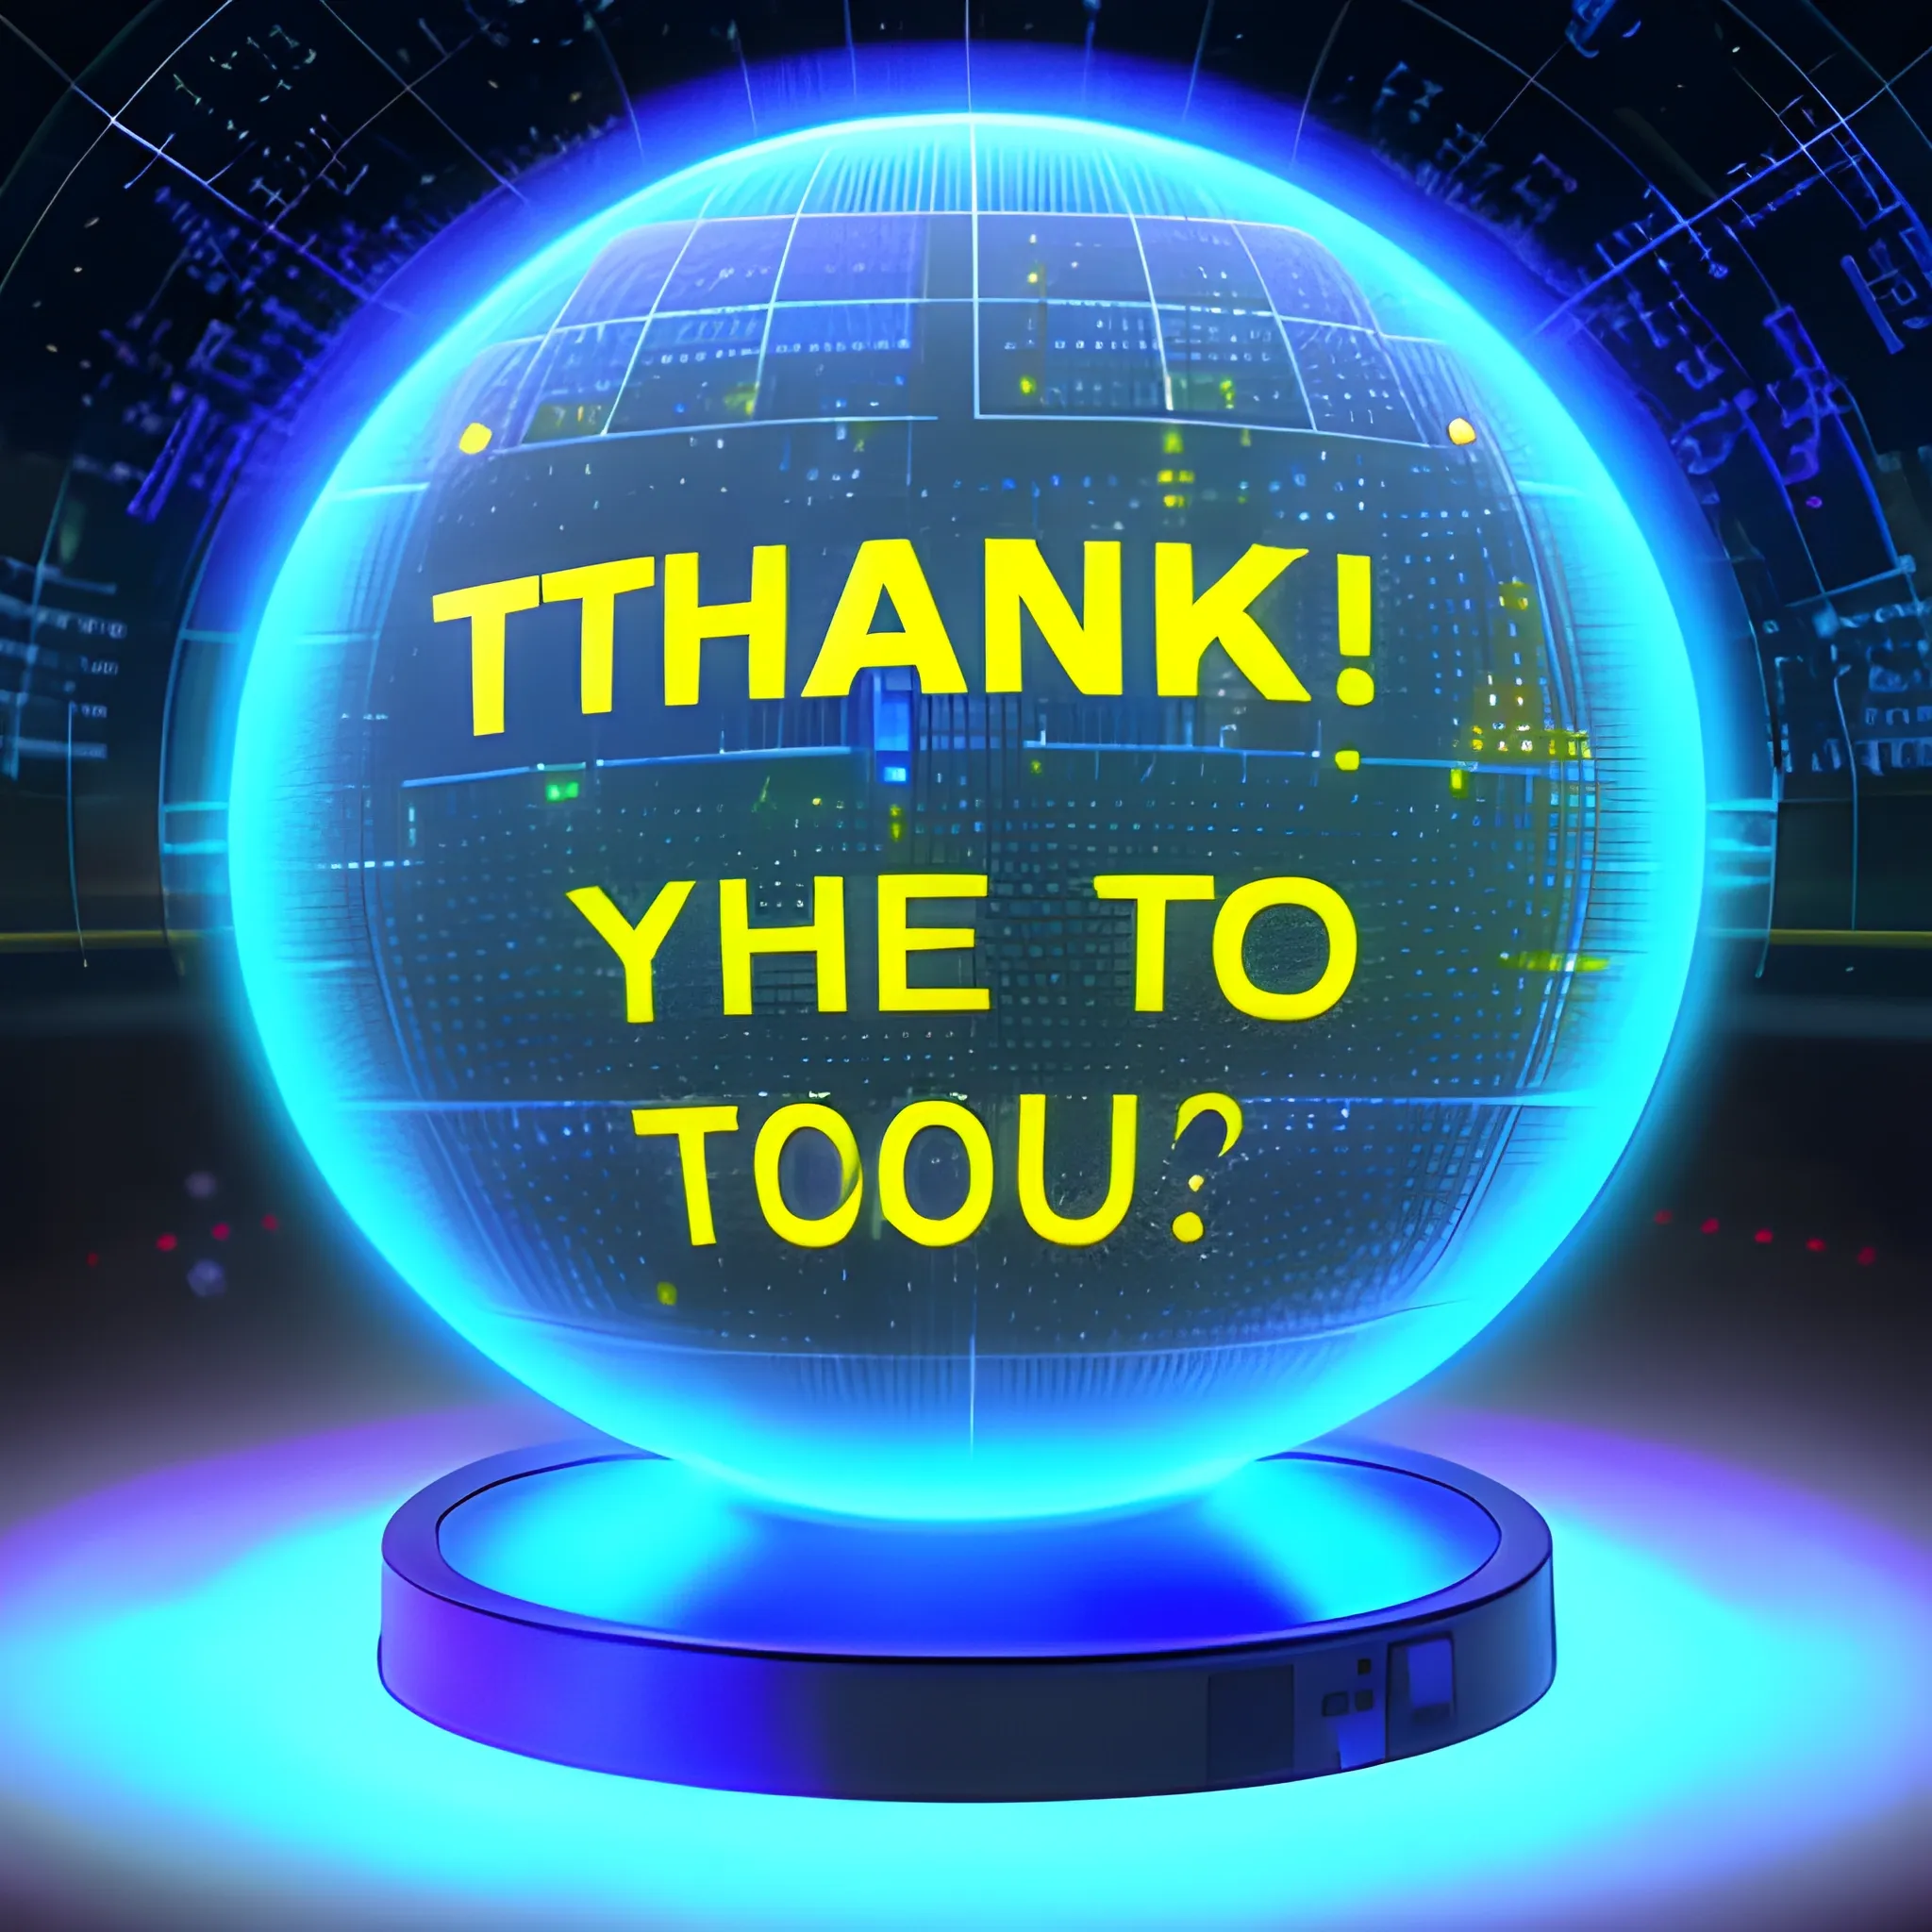 Thank you message in Spanish, in a holographic environment projected on a sphere, in a server environment, with blue monitor lighting